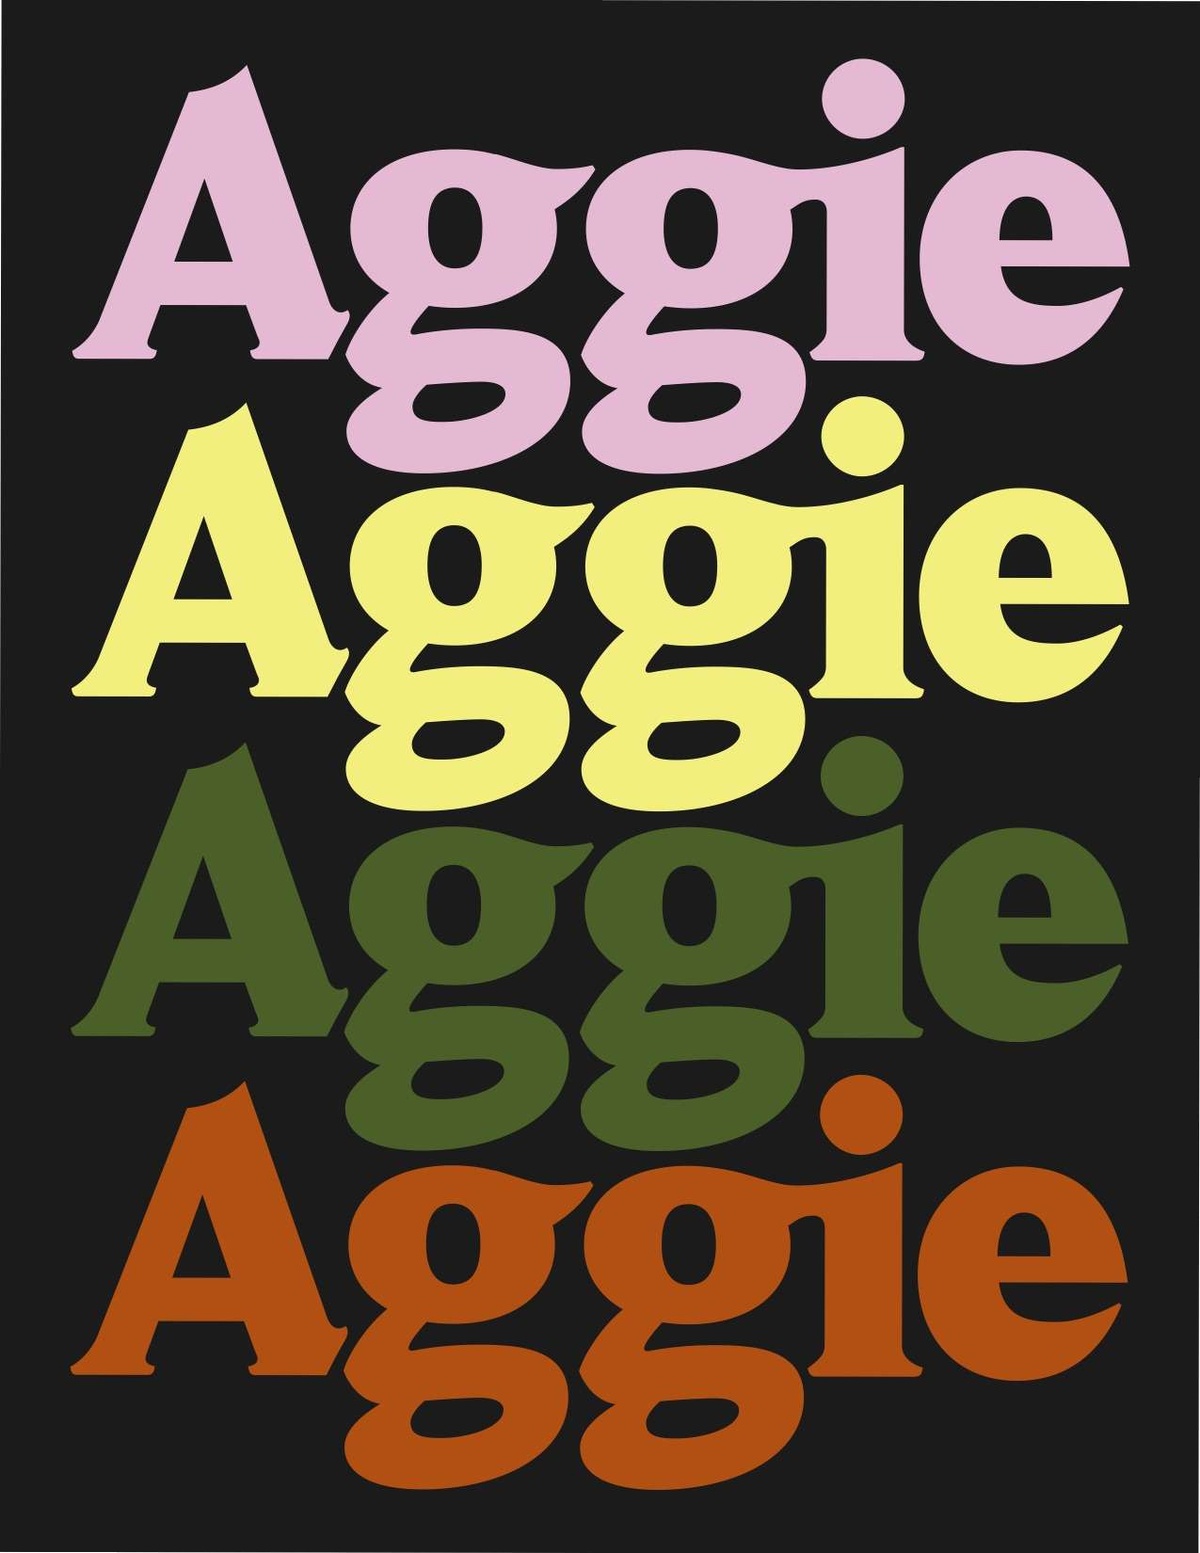 Color poster with the sign "Aggie" repeated four times in pink, yellow, green, and red color.